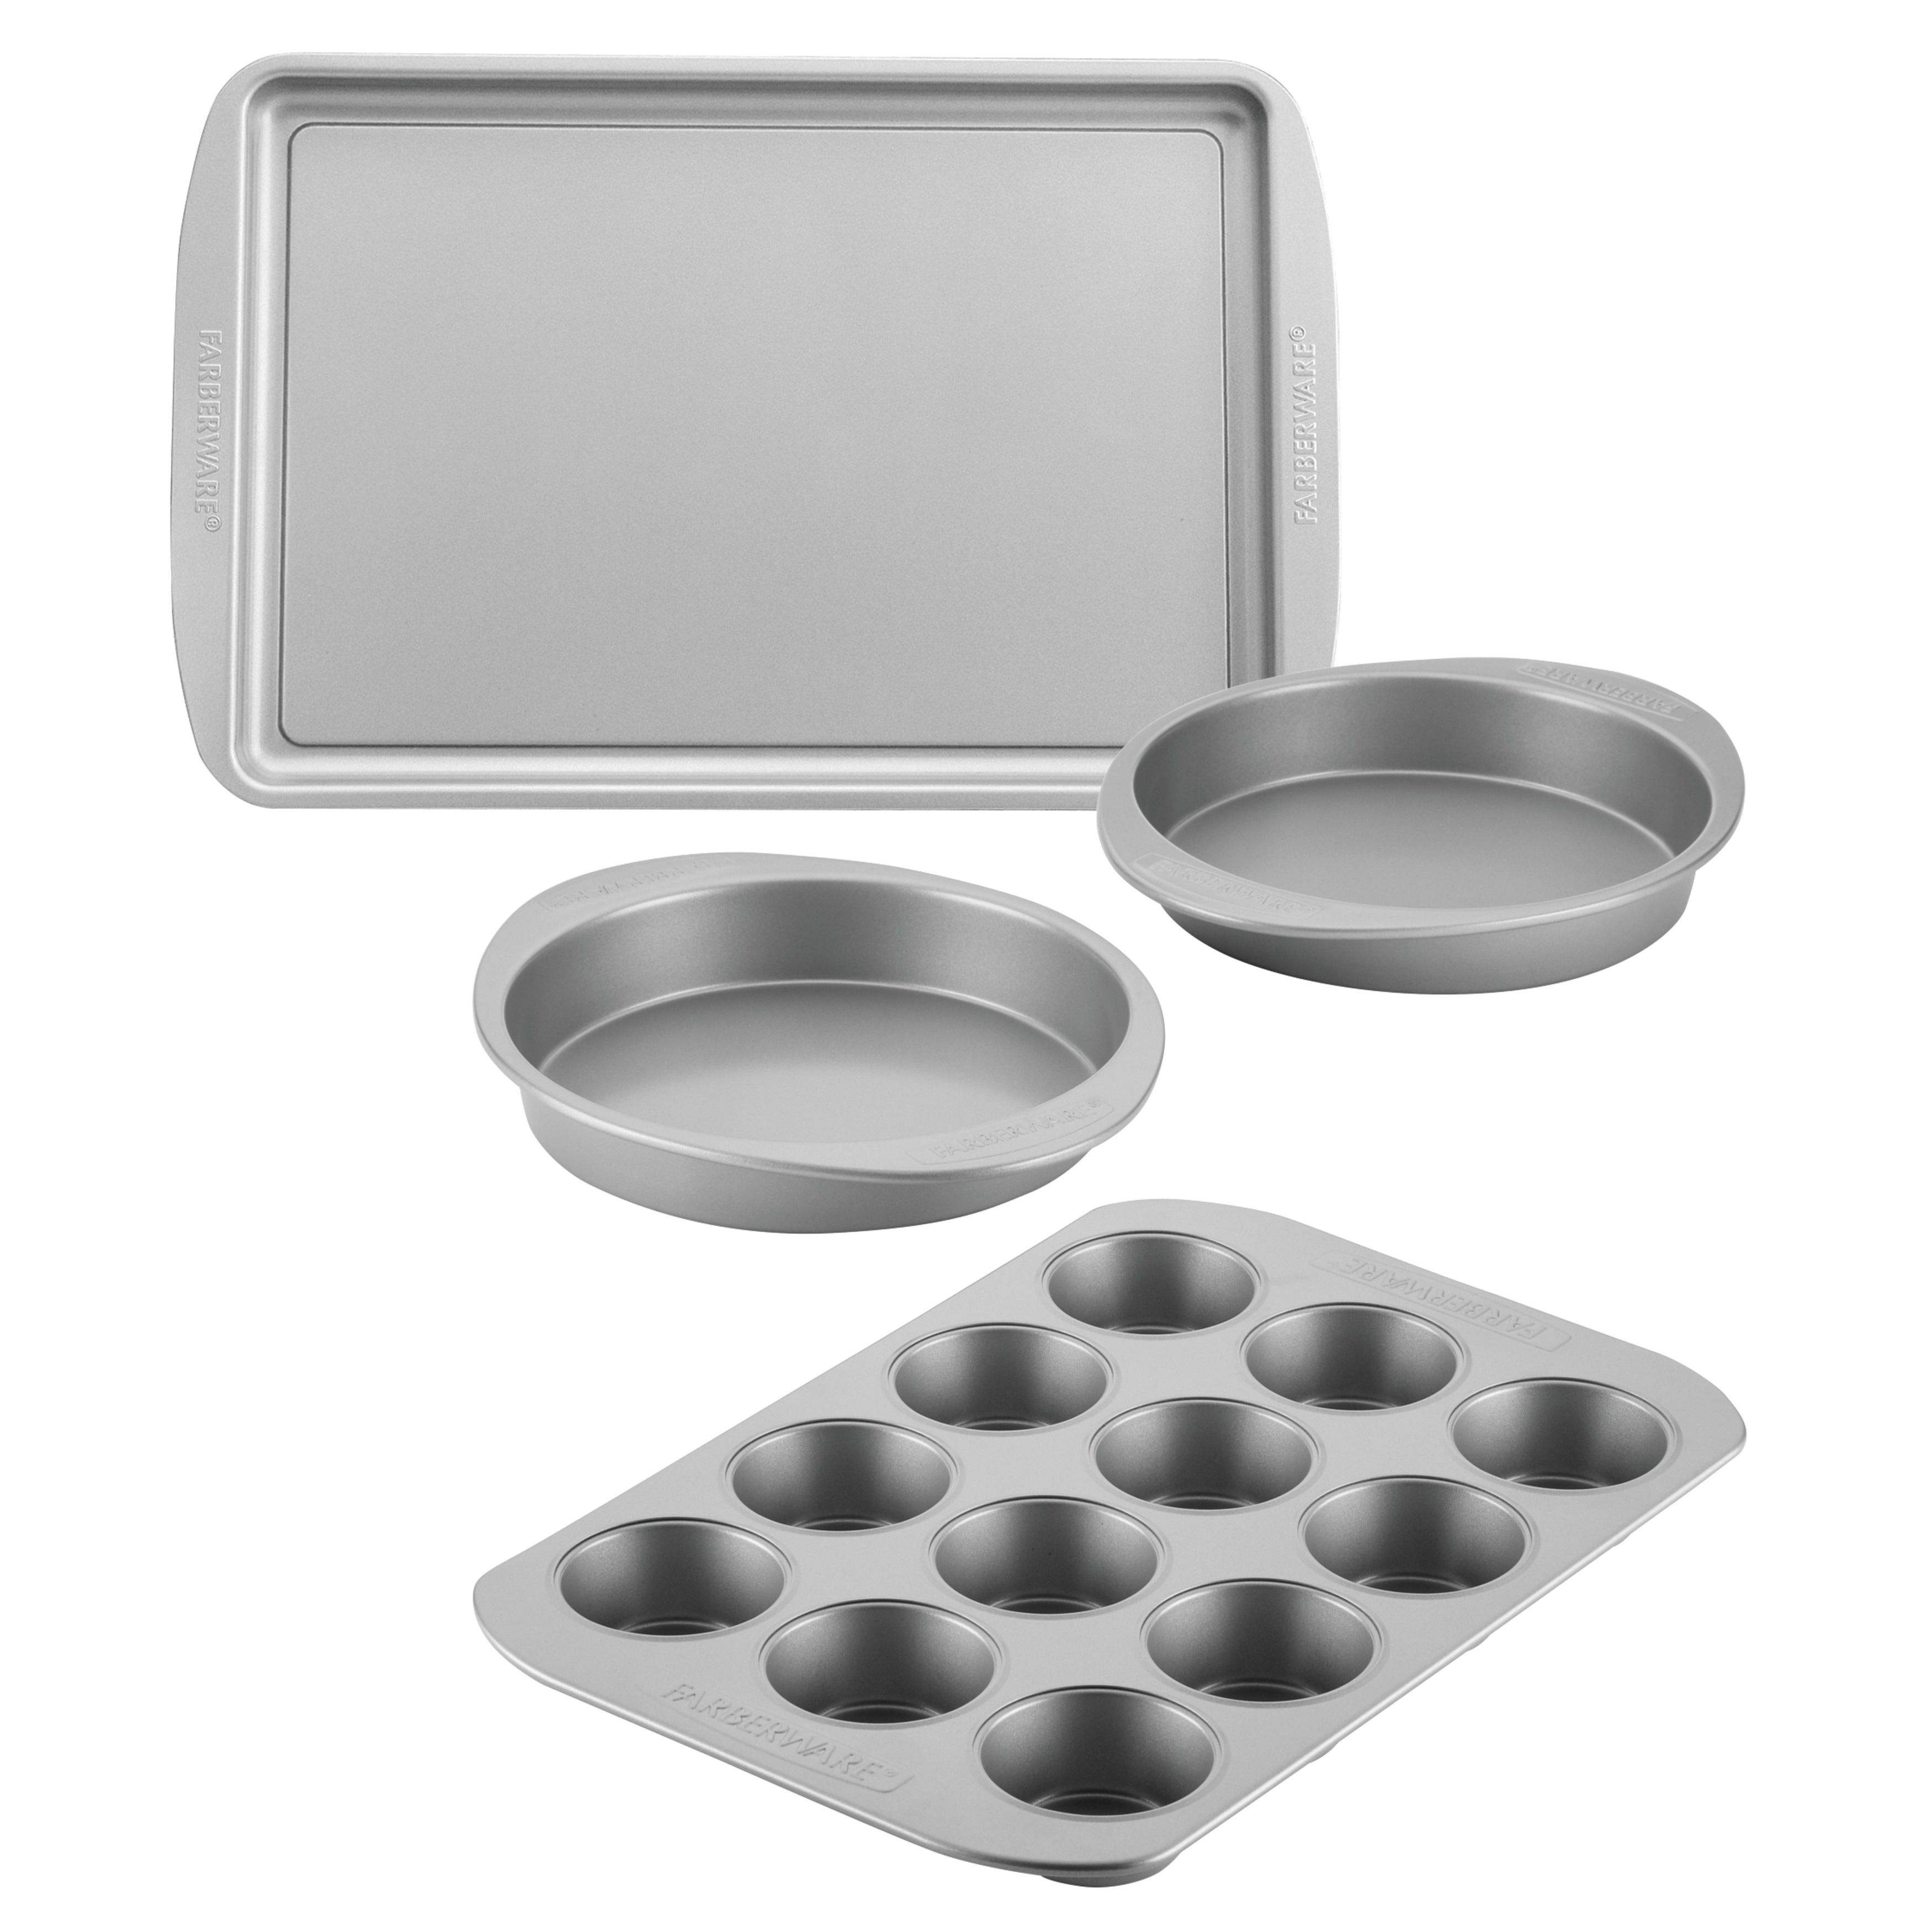 https://ak1.ostkcdn.com/images/products/is/images/direct/d9152791d55b28137d74c99aa16146e5e8cc00ae/Farberware-Bakeware-Cookie-Muffin-Cupcake-%26-Cake-Pan-Set-4-Piece.jpg